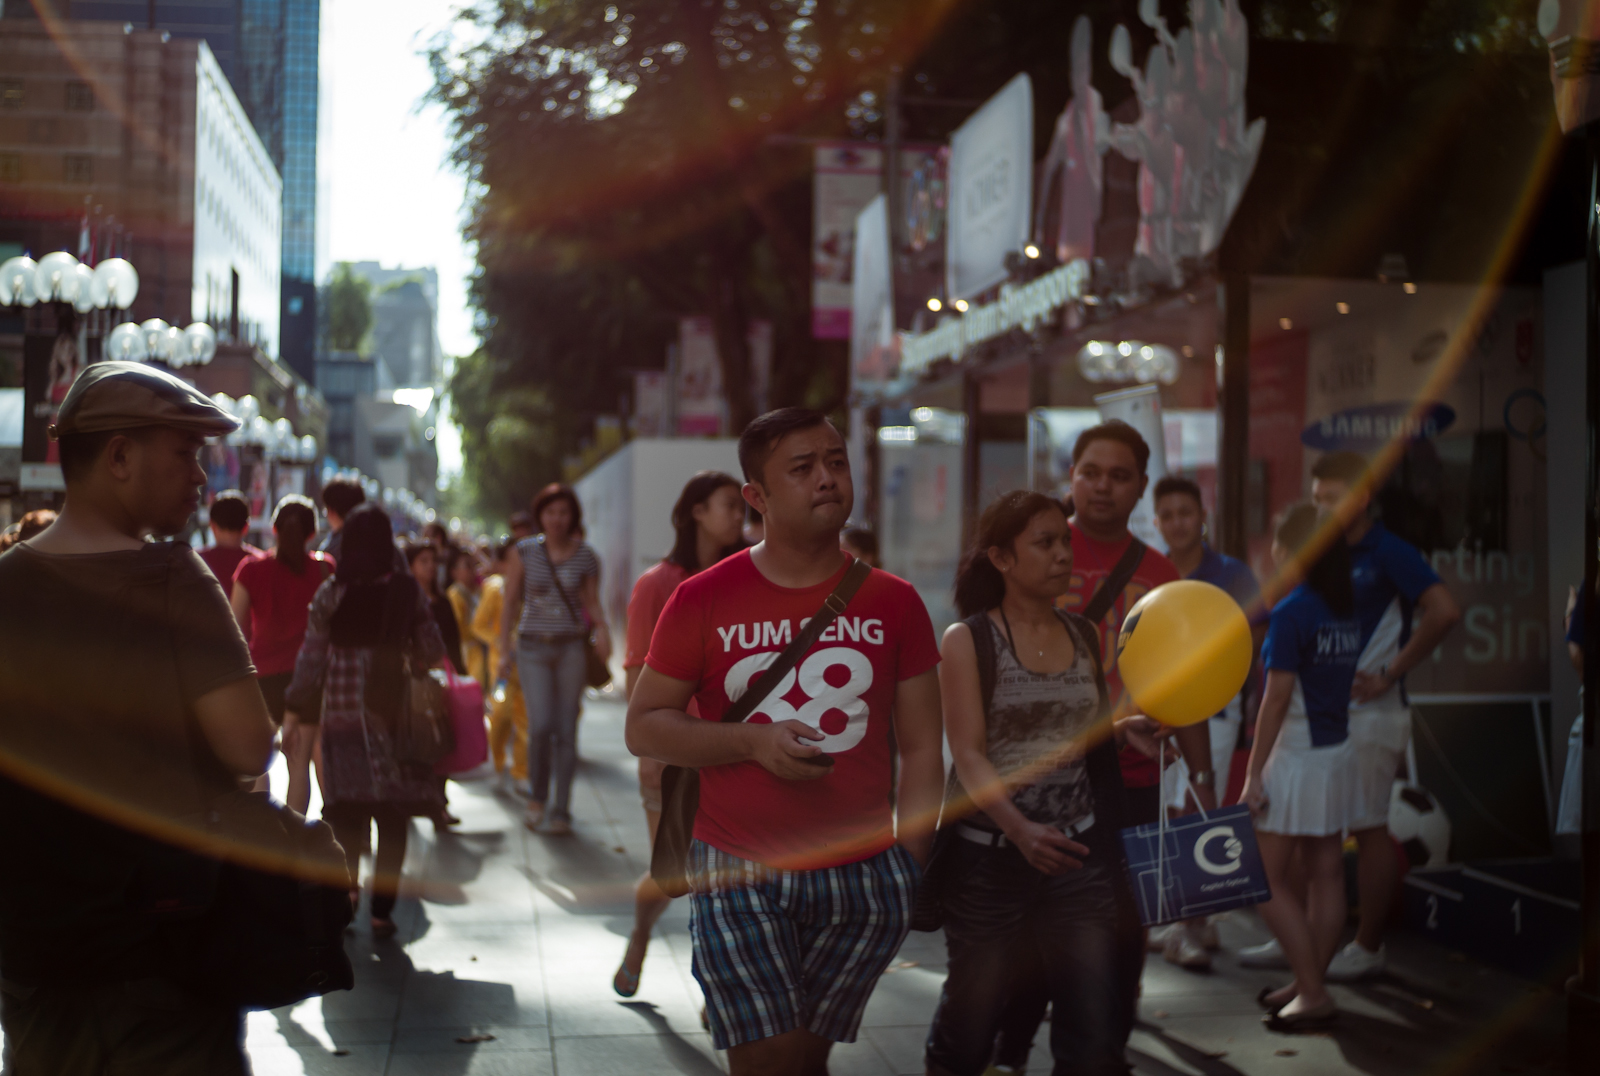 Street scene in Orchard Road with a large lens flare